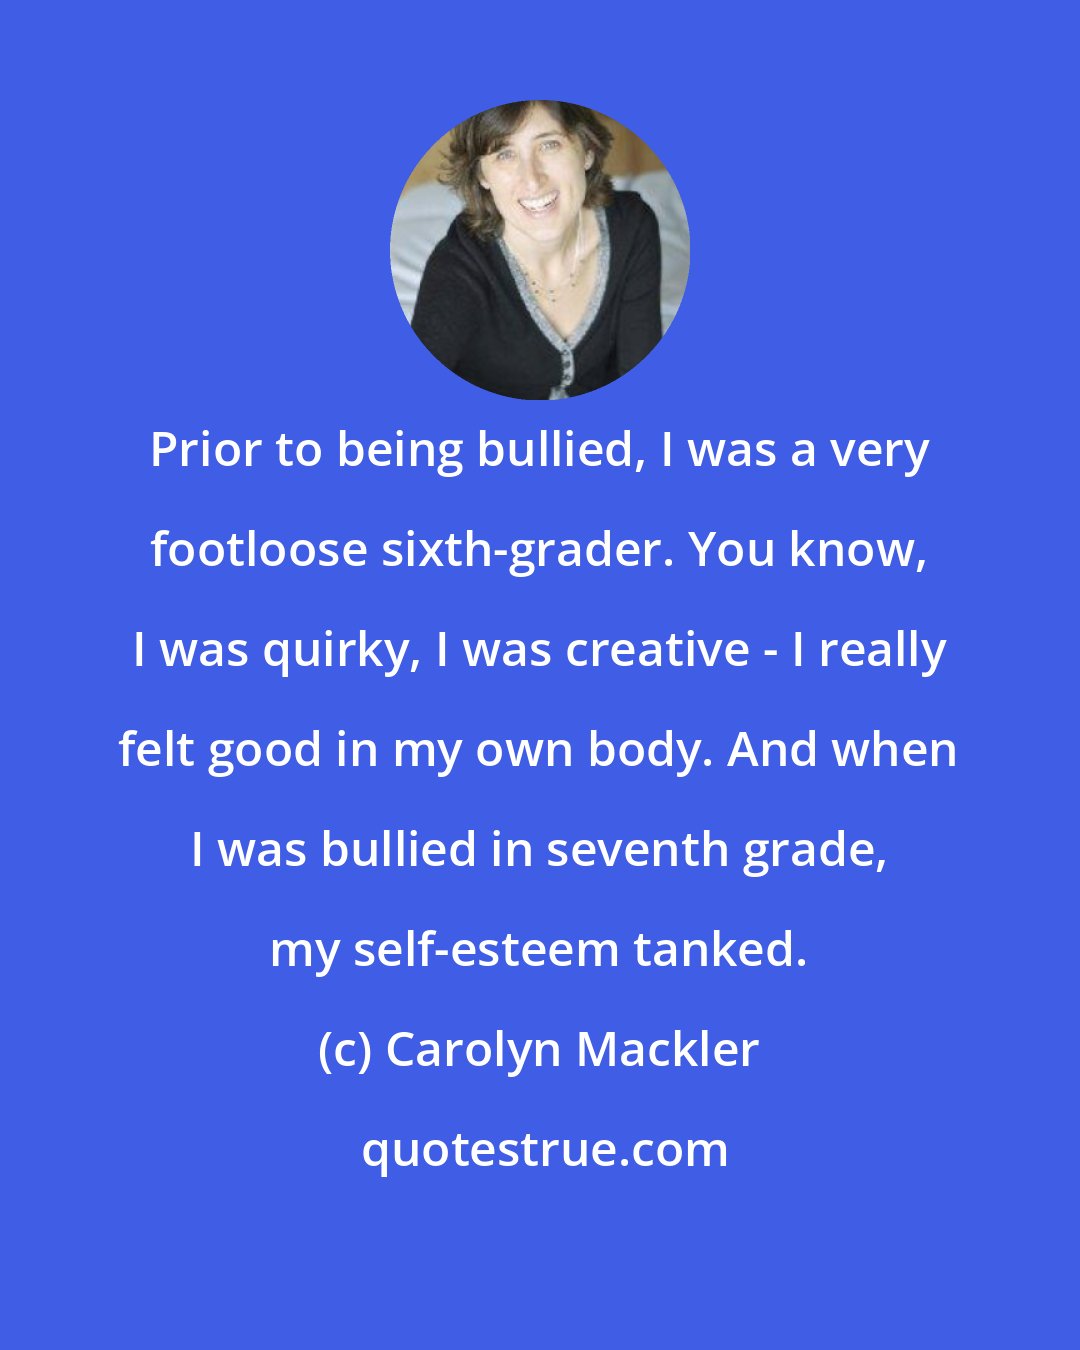 Carolyn Mackler: Prior to being bullied, I was a very footloose sixth-grader. You know, I was quirky, I was creative - I really felt good in my own body. And when I was bullied in seventh grade, my self-esteem tanked.